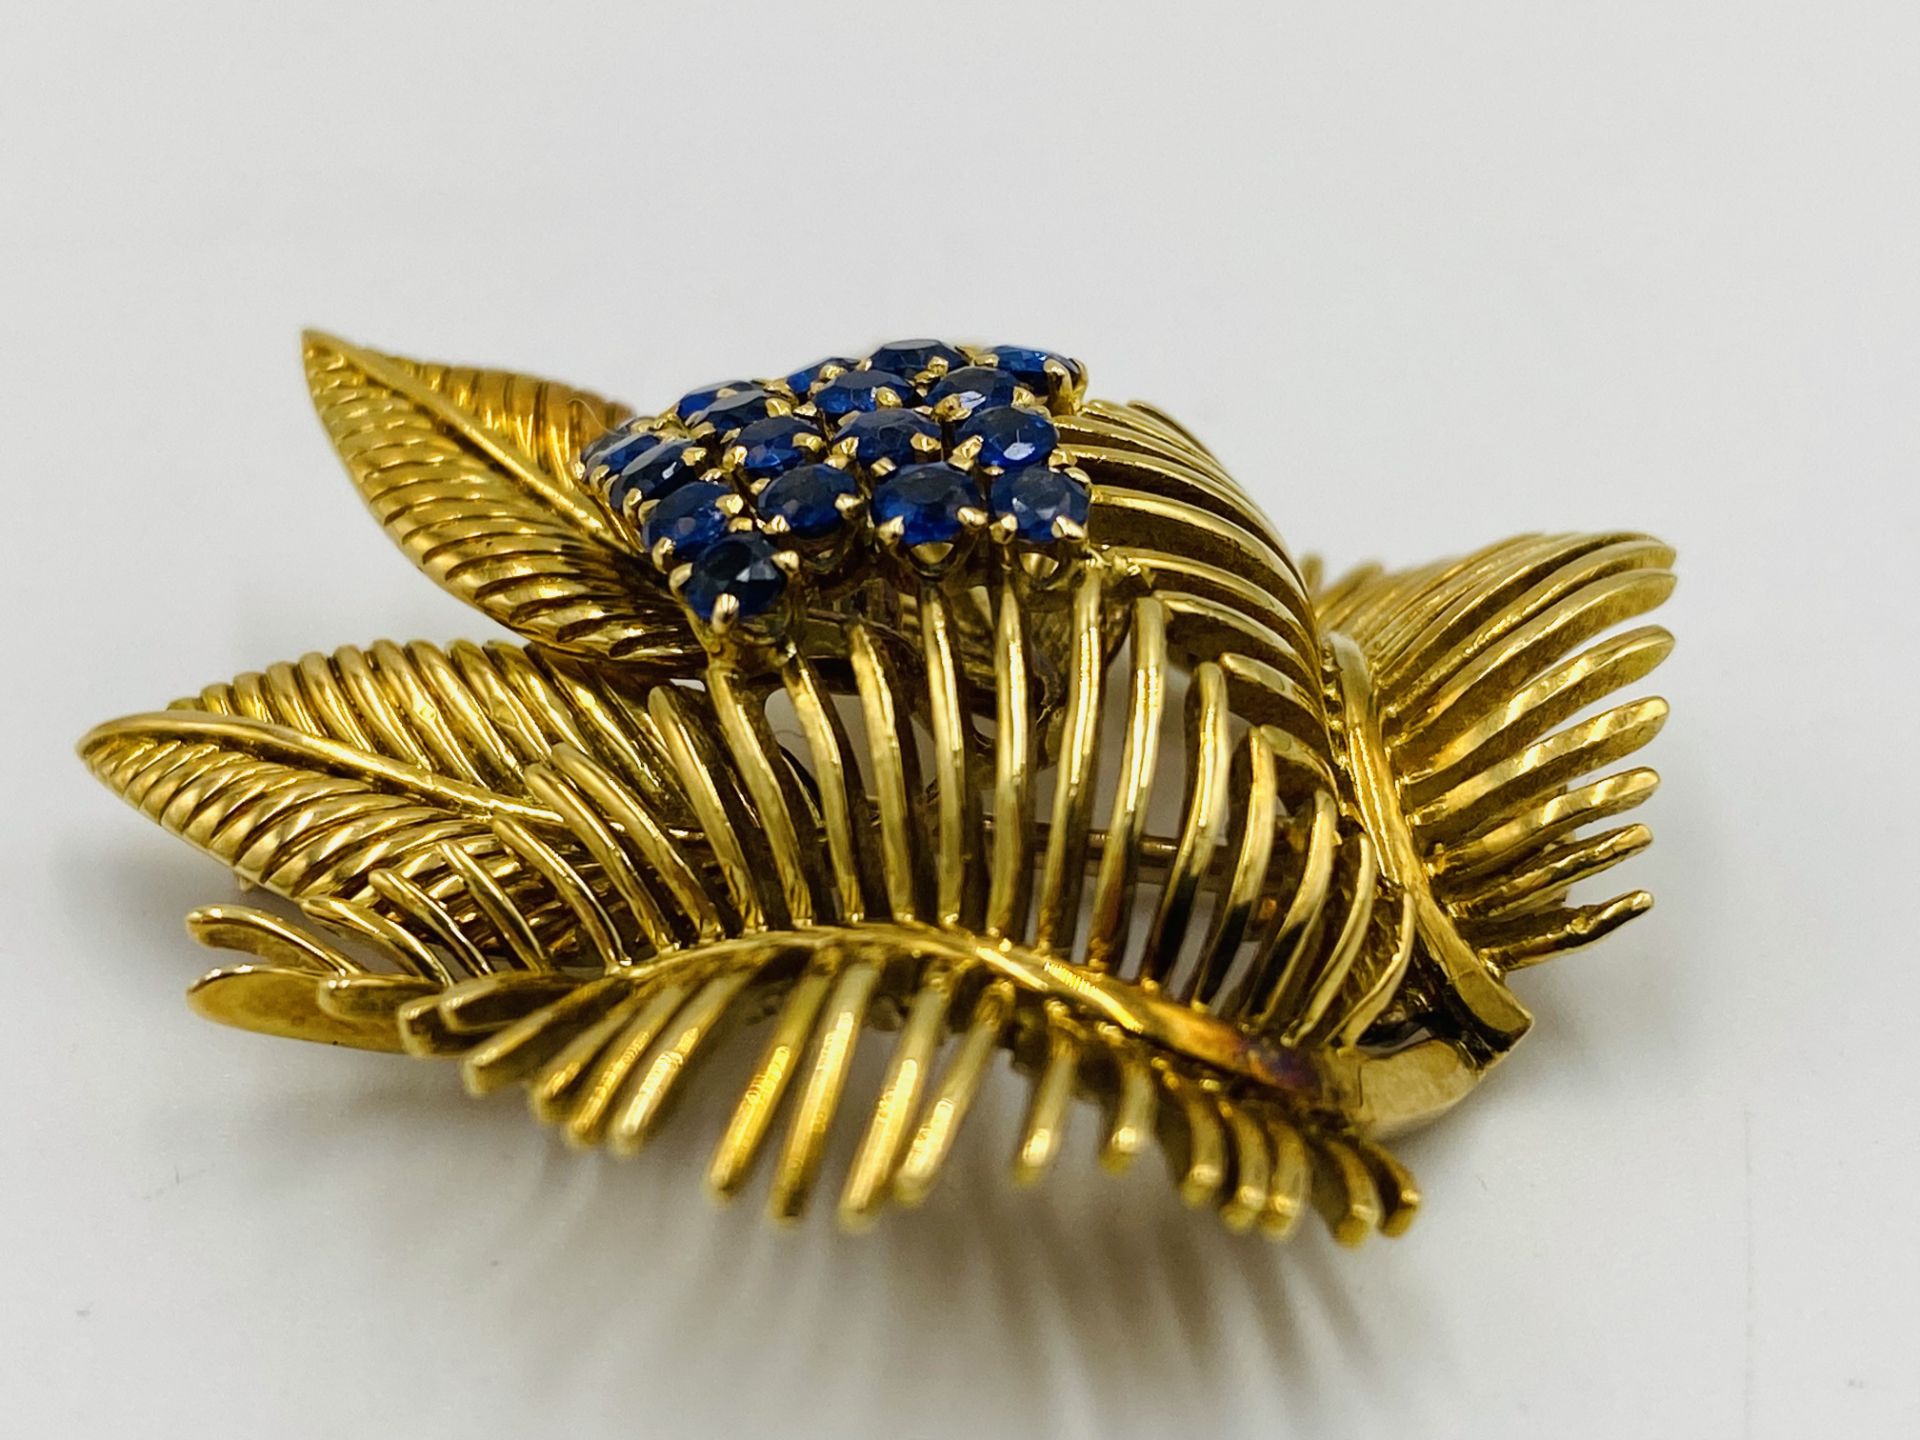 18ct gold, sapphire and diamond brooch - Image 3 of 5